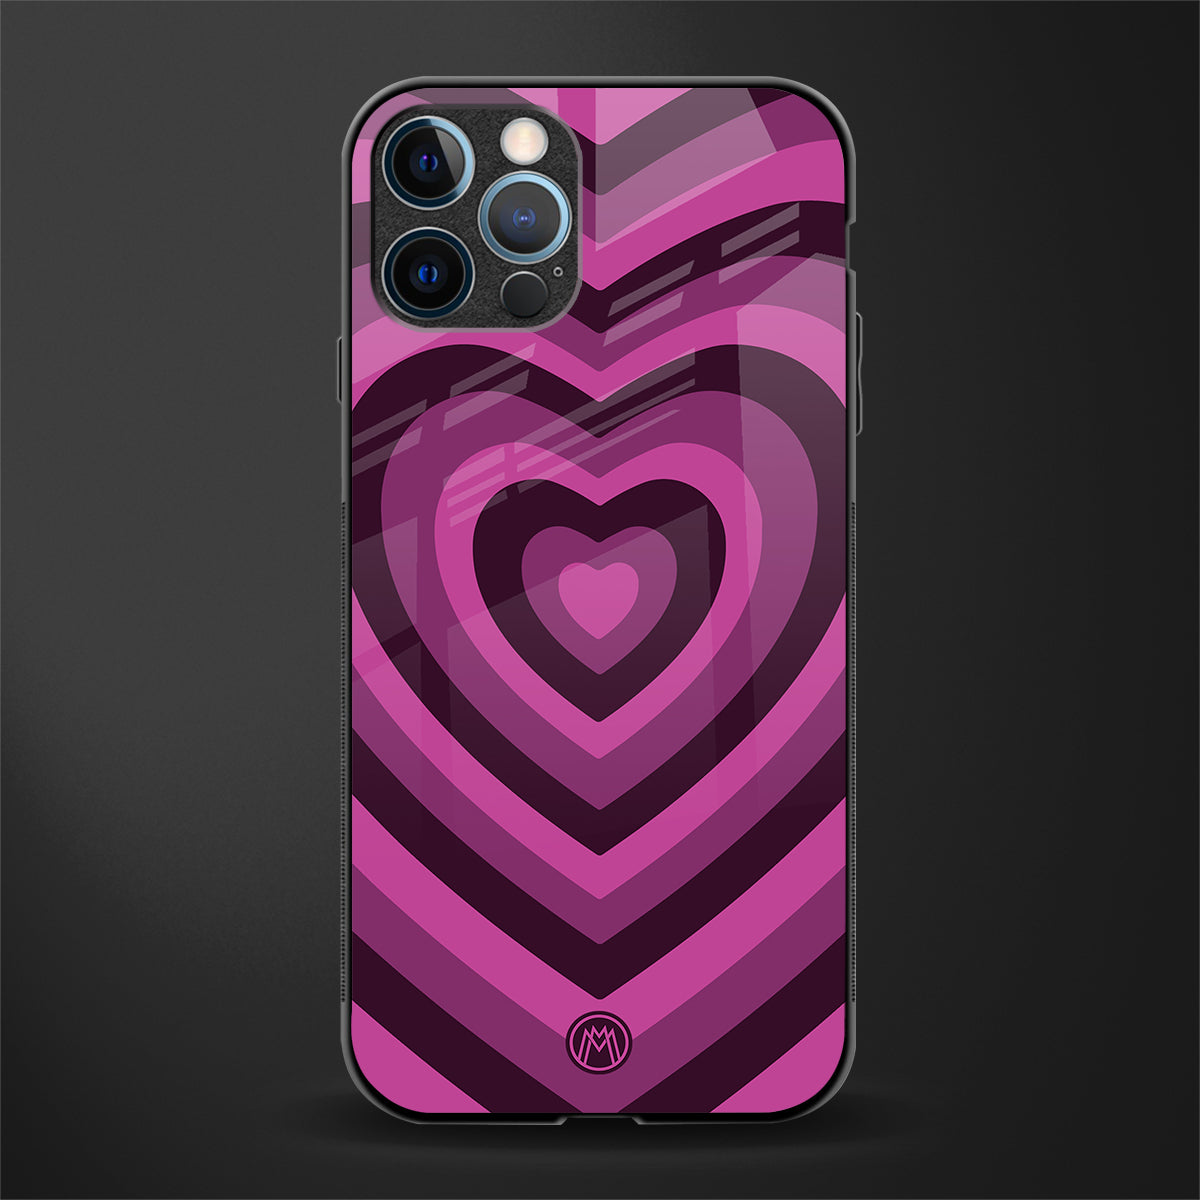 y2k burgundy hearts aesthetic glass case for iphone 12 pro max image